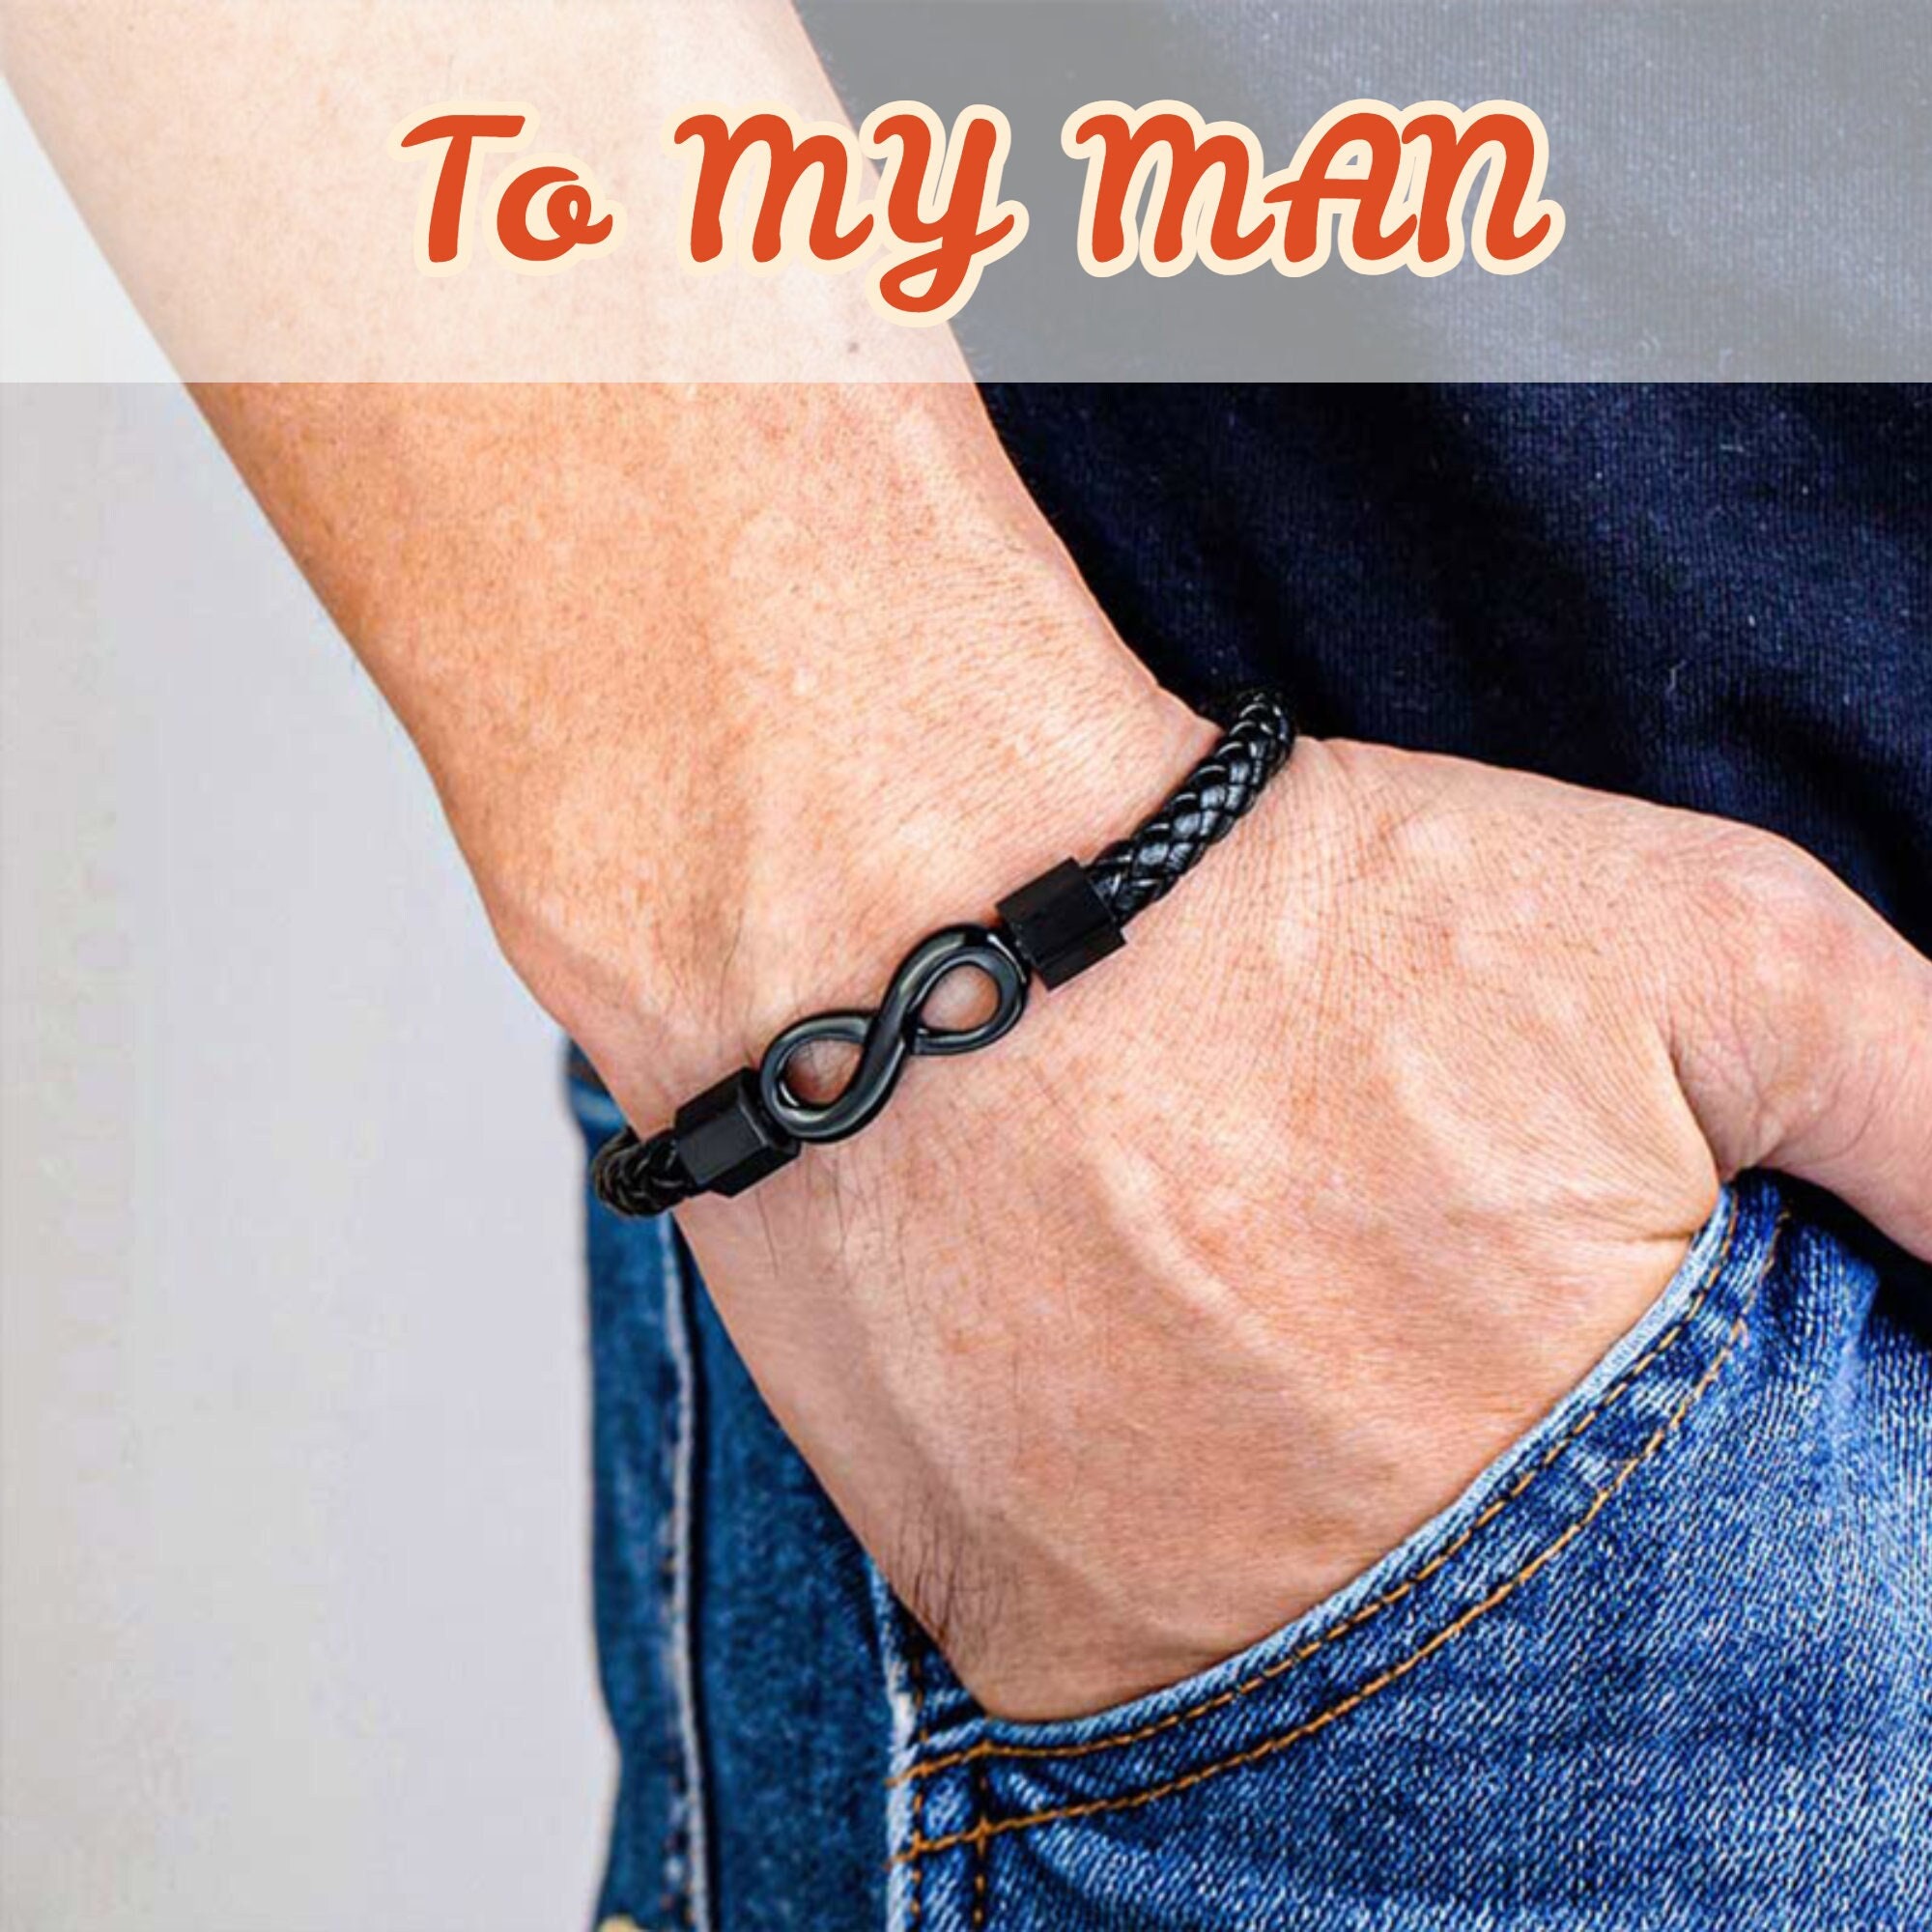 Croc Compatible Charms for Dads, Croc Compatible Charms for Men